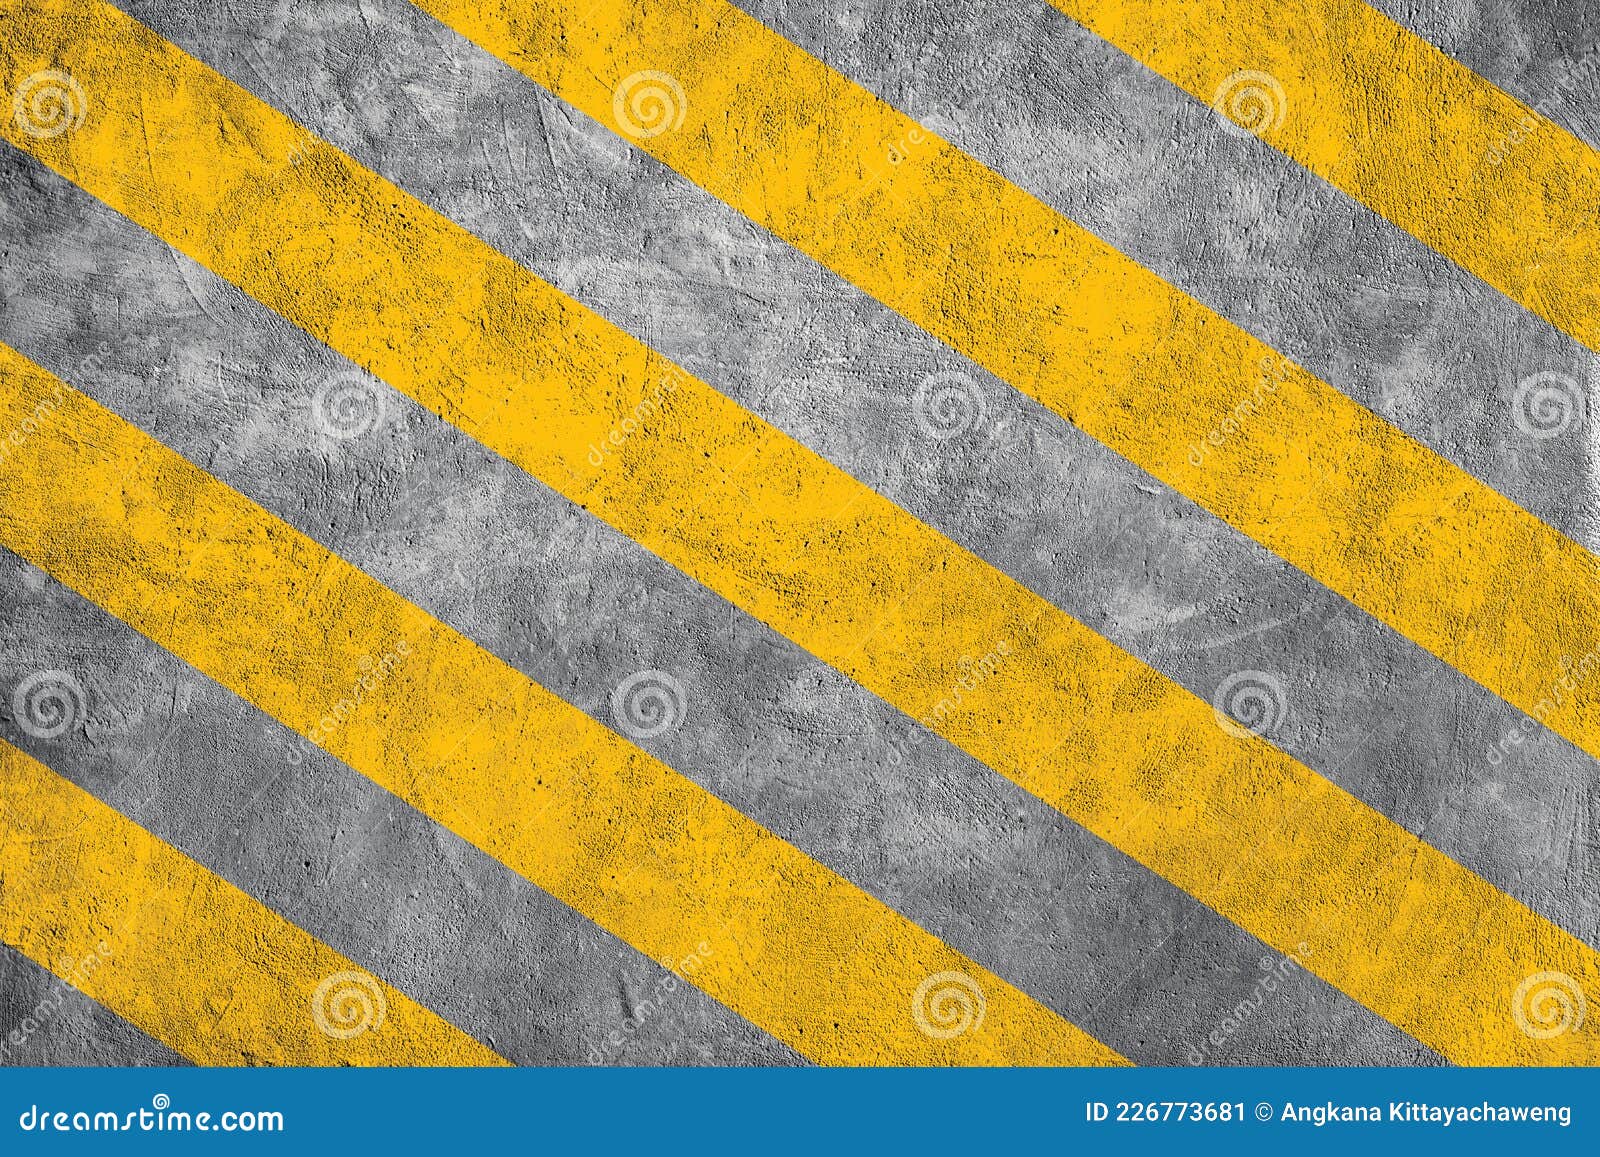 yellow-caution-warning-lines-on-concrete-floor-grunge-texture